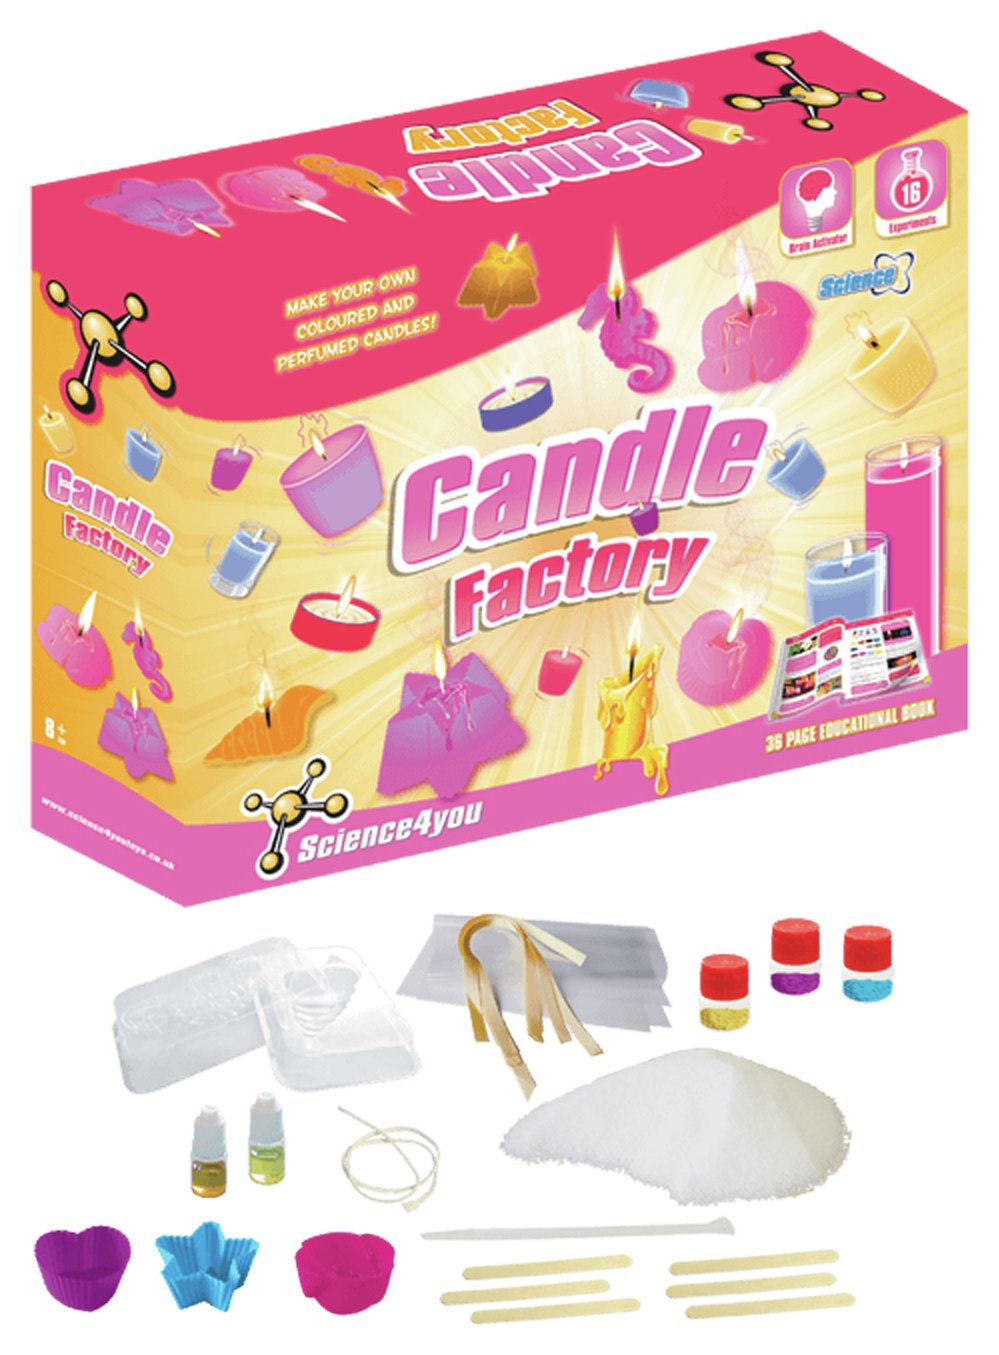 Science4you Candle Factory Kit